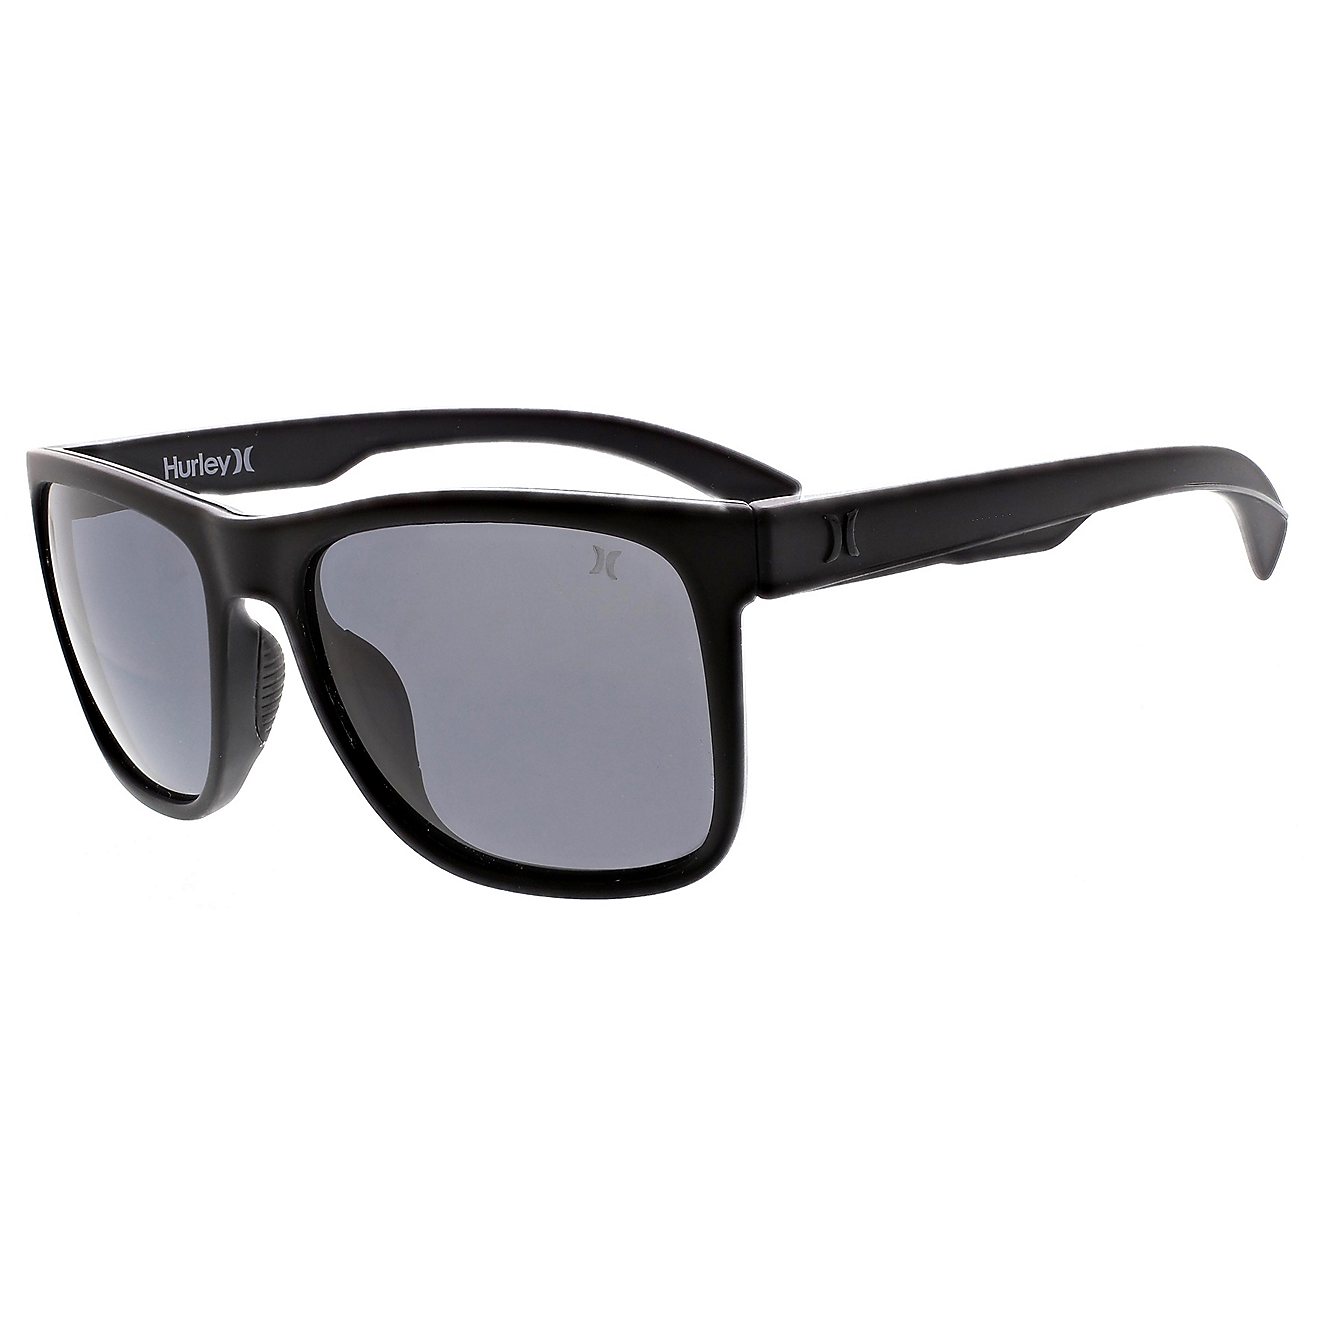 Hurley New Schoolers Sunglasses | Free Shipping at Academy